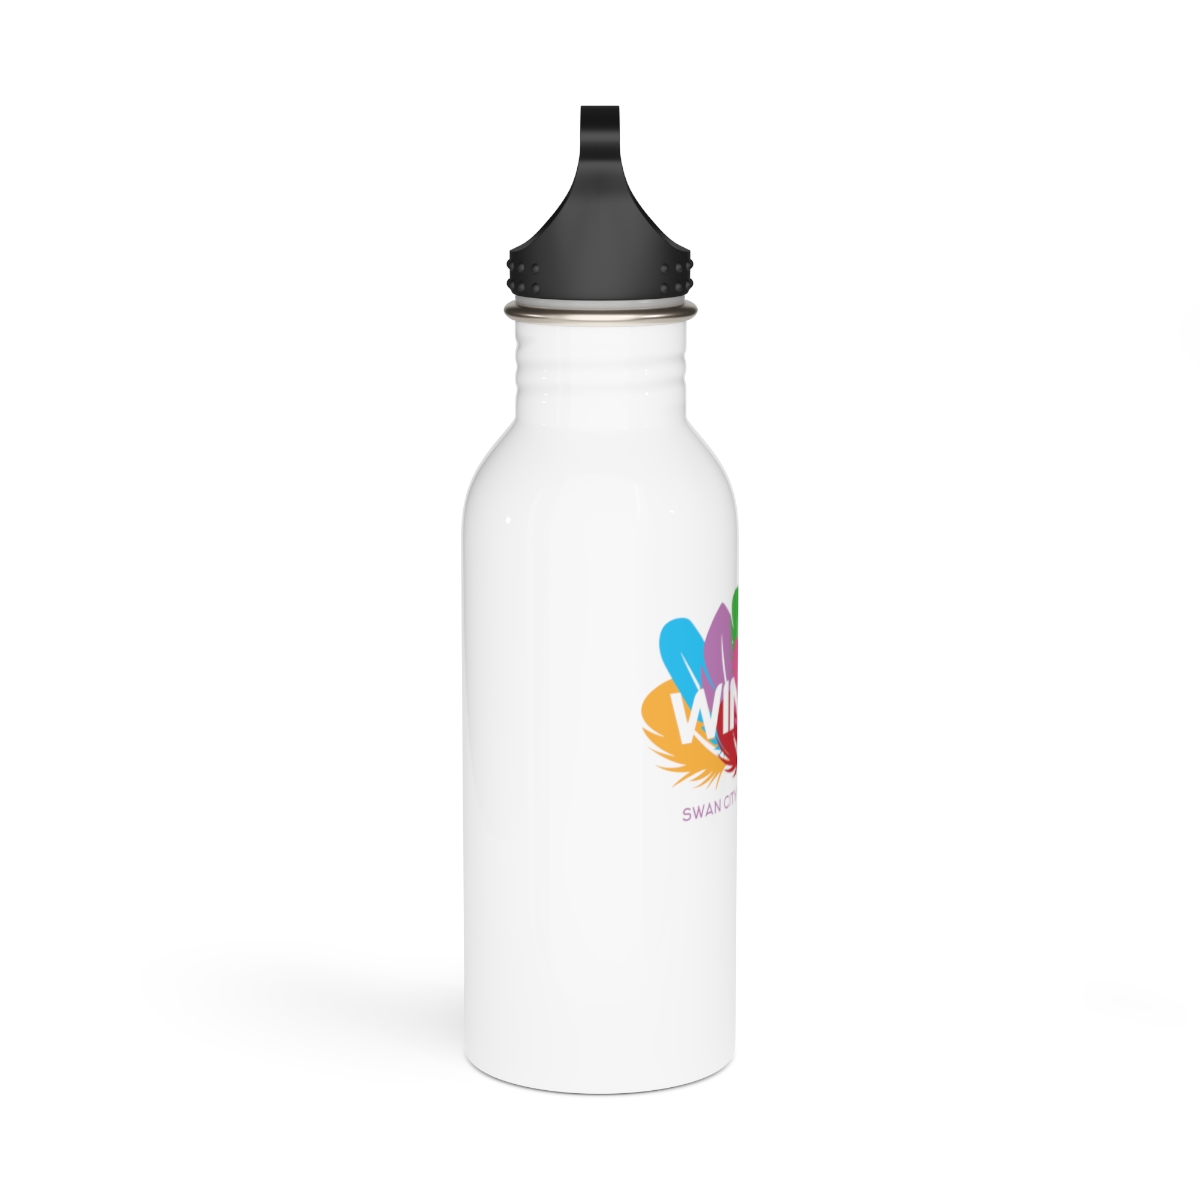 WING IT Stainless Steel Water Bottle product thumbnail image